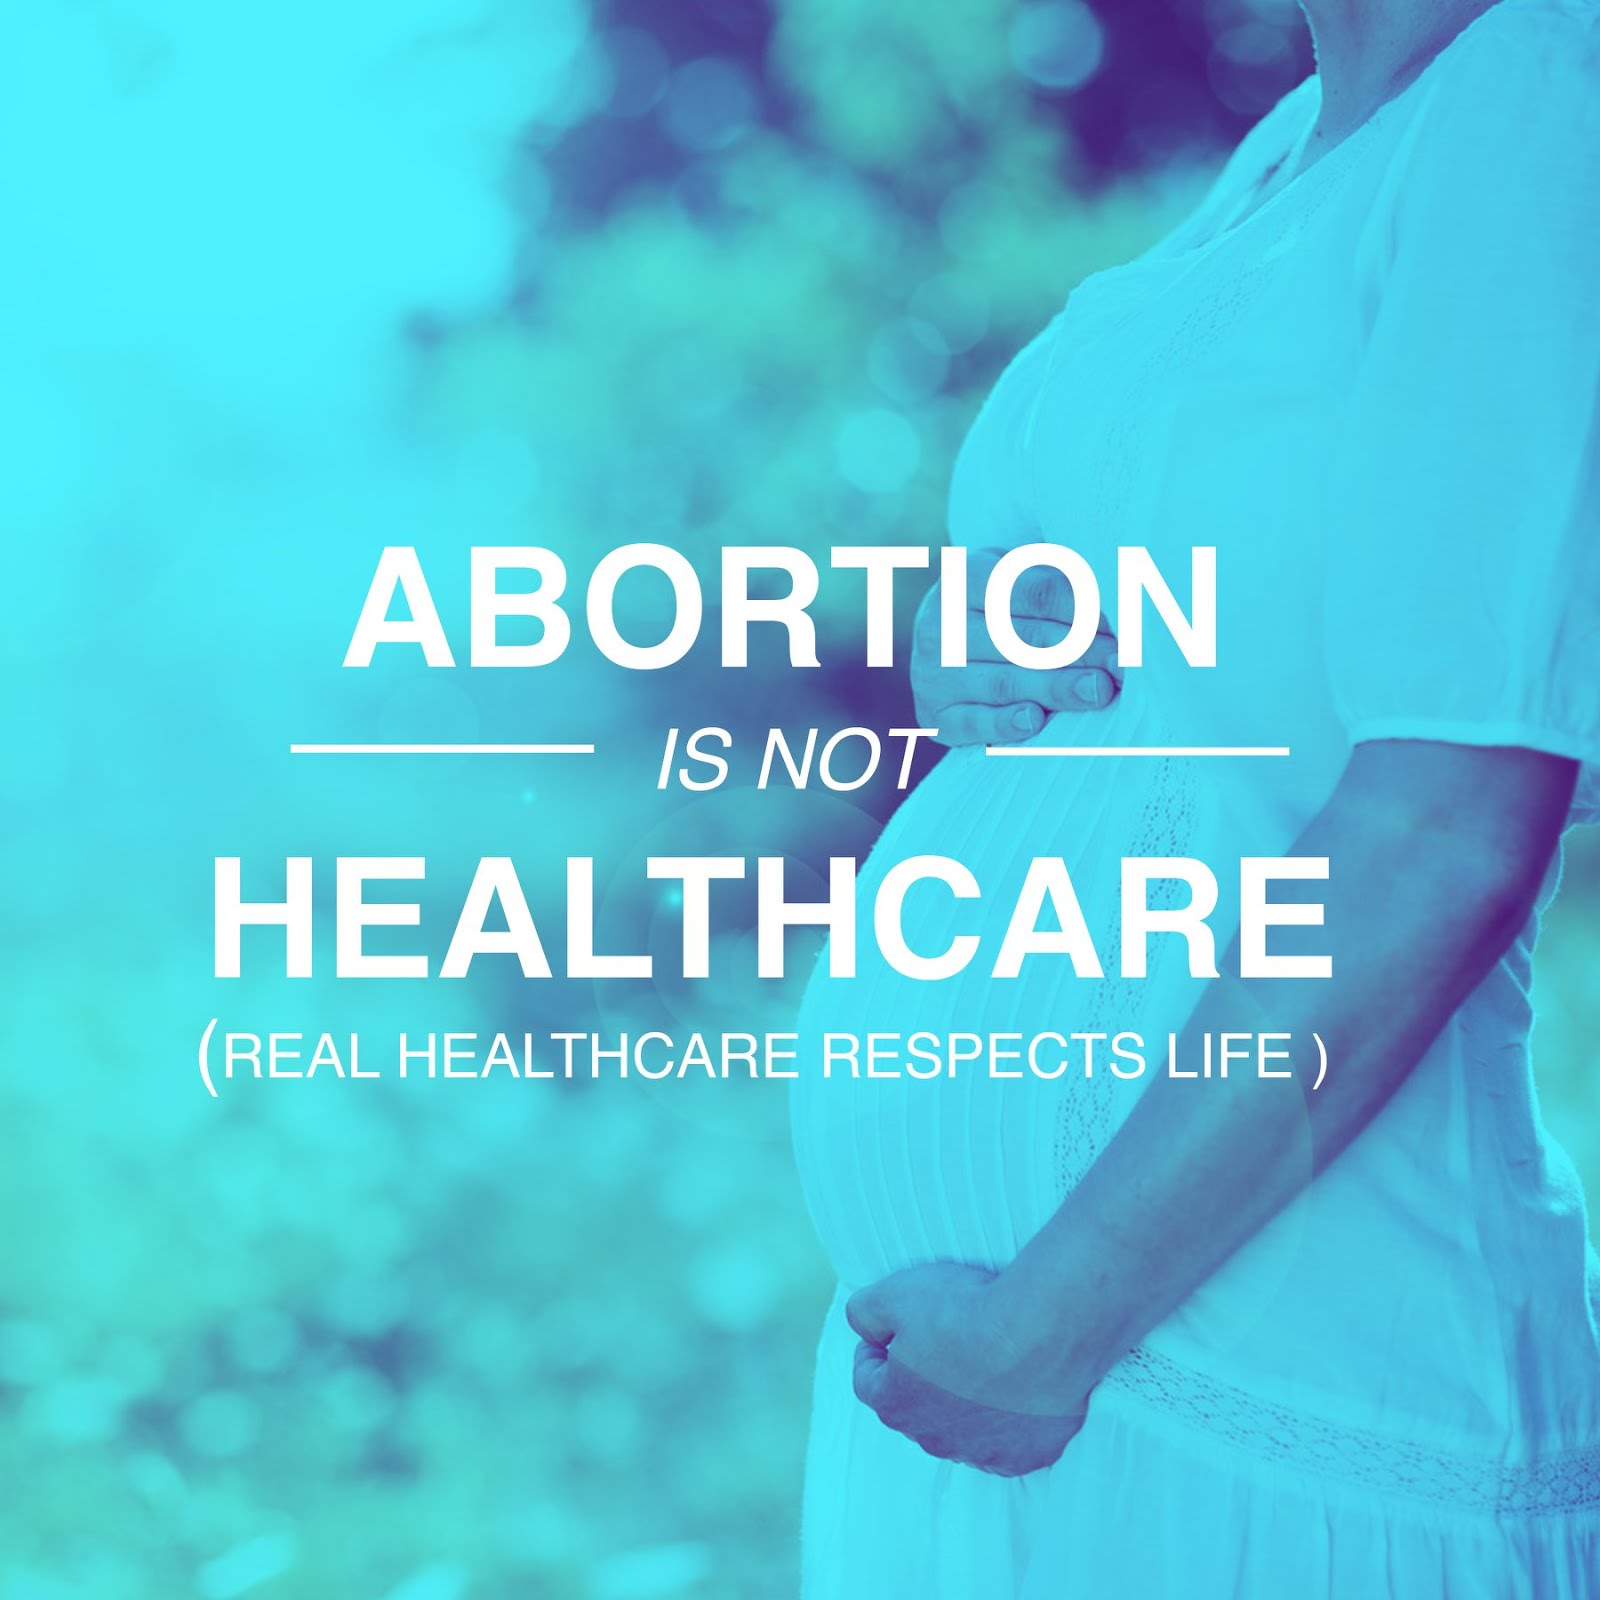 Abortion is NOT Healthcare